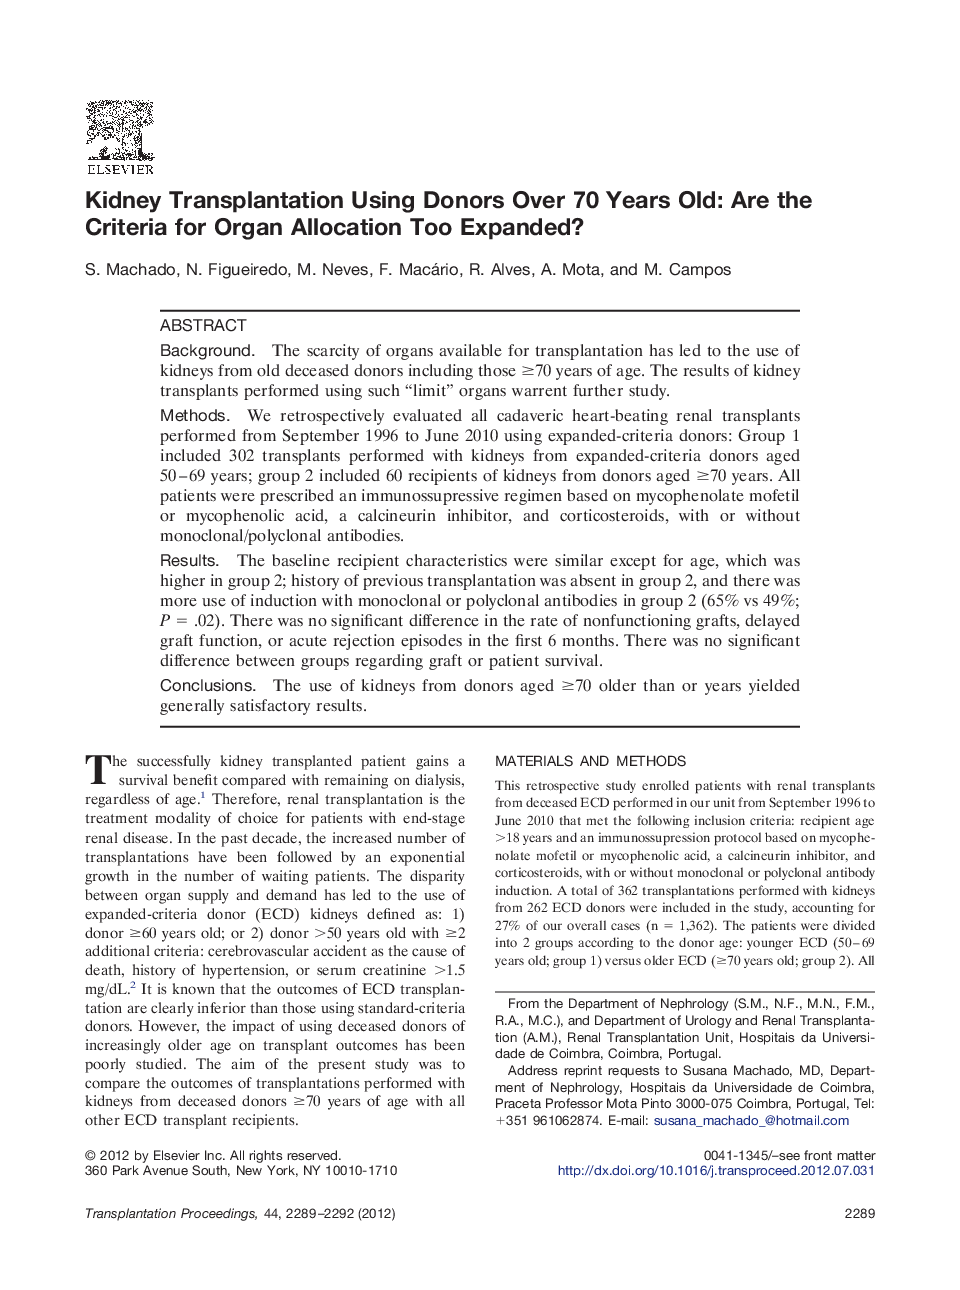 Organ donation and allocationOrgan allocationKidney Transplantation Using Donors Over 70 Years Old: Are the Criteria for Organ Allocation Too Expanded?